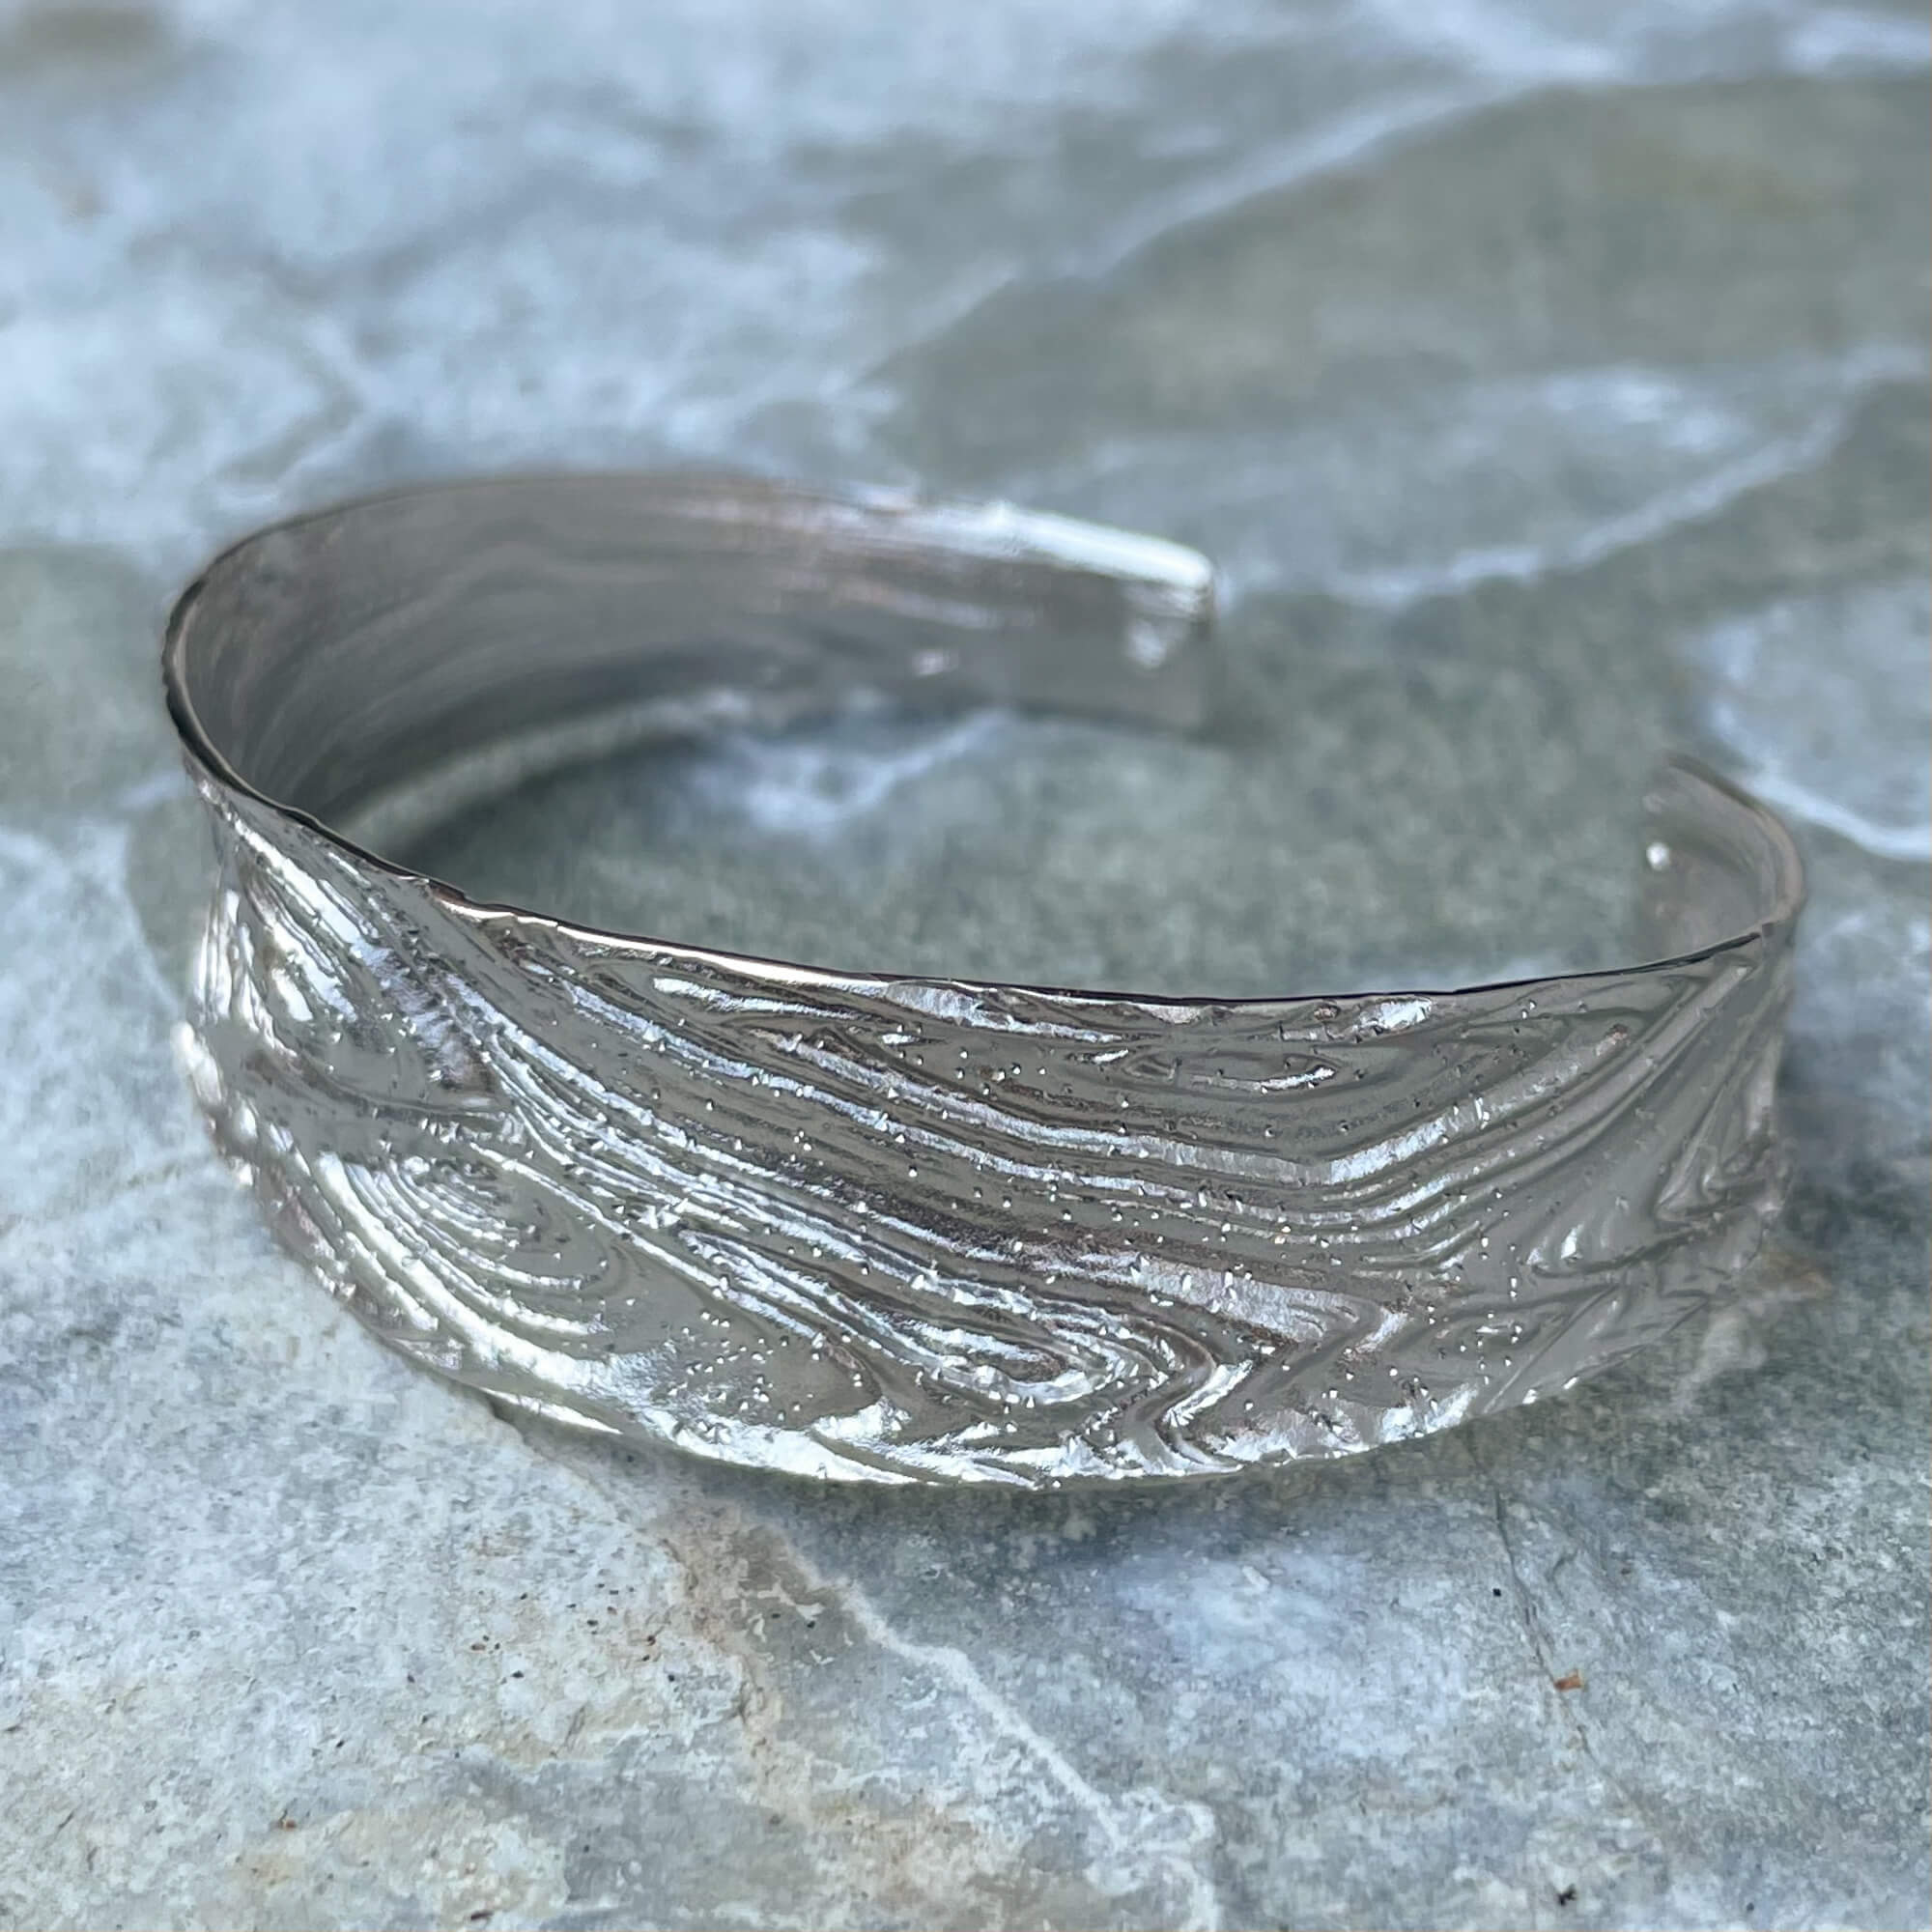 Silver and narrow machined slave bracelet